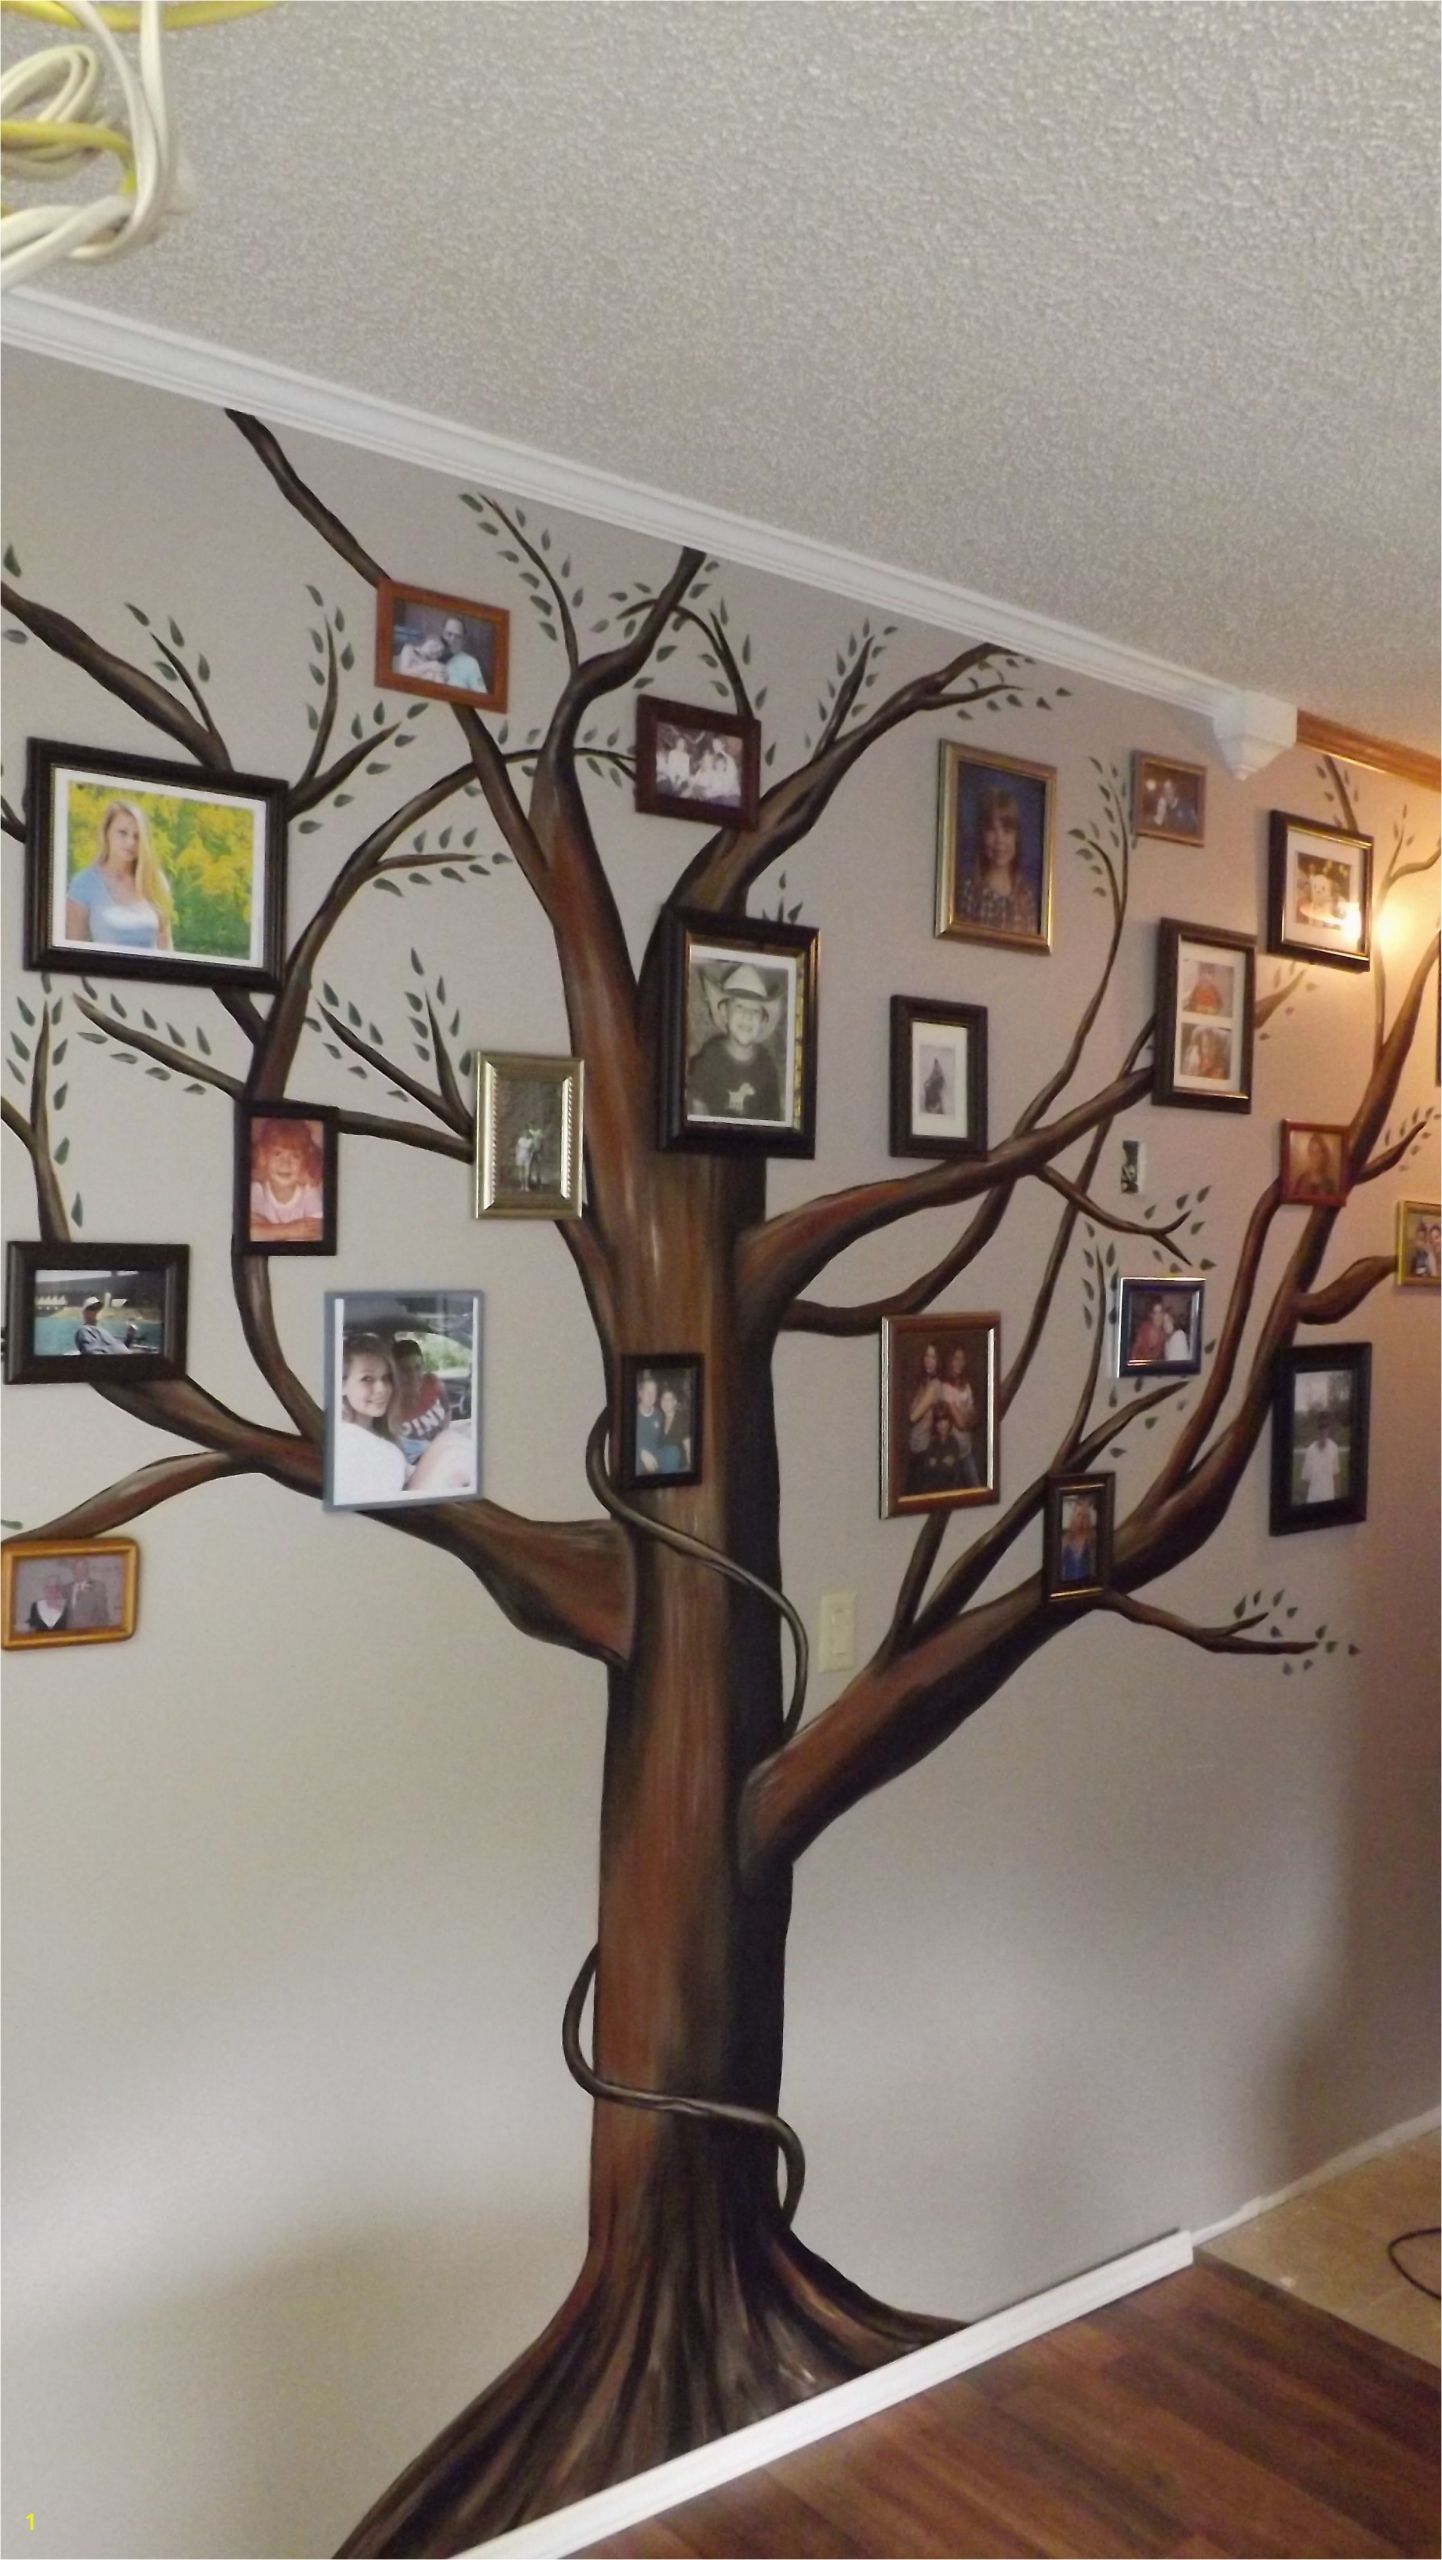 Family Tree Wall Mural Stencils the Idea Not Necessarily the Actual Tree